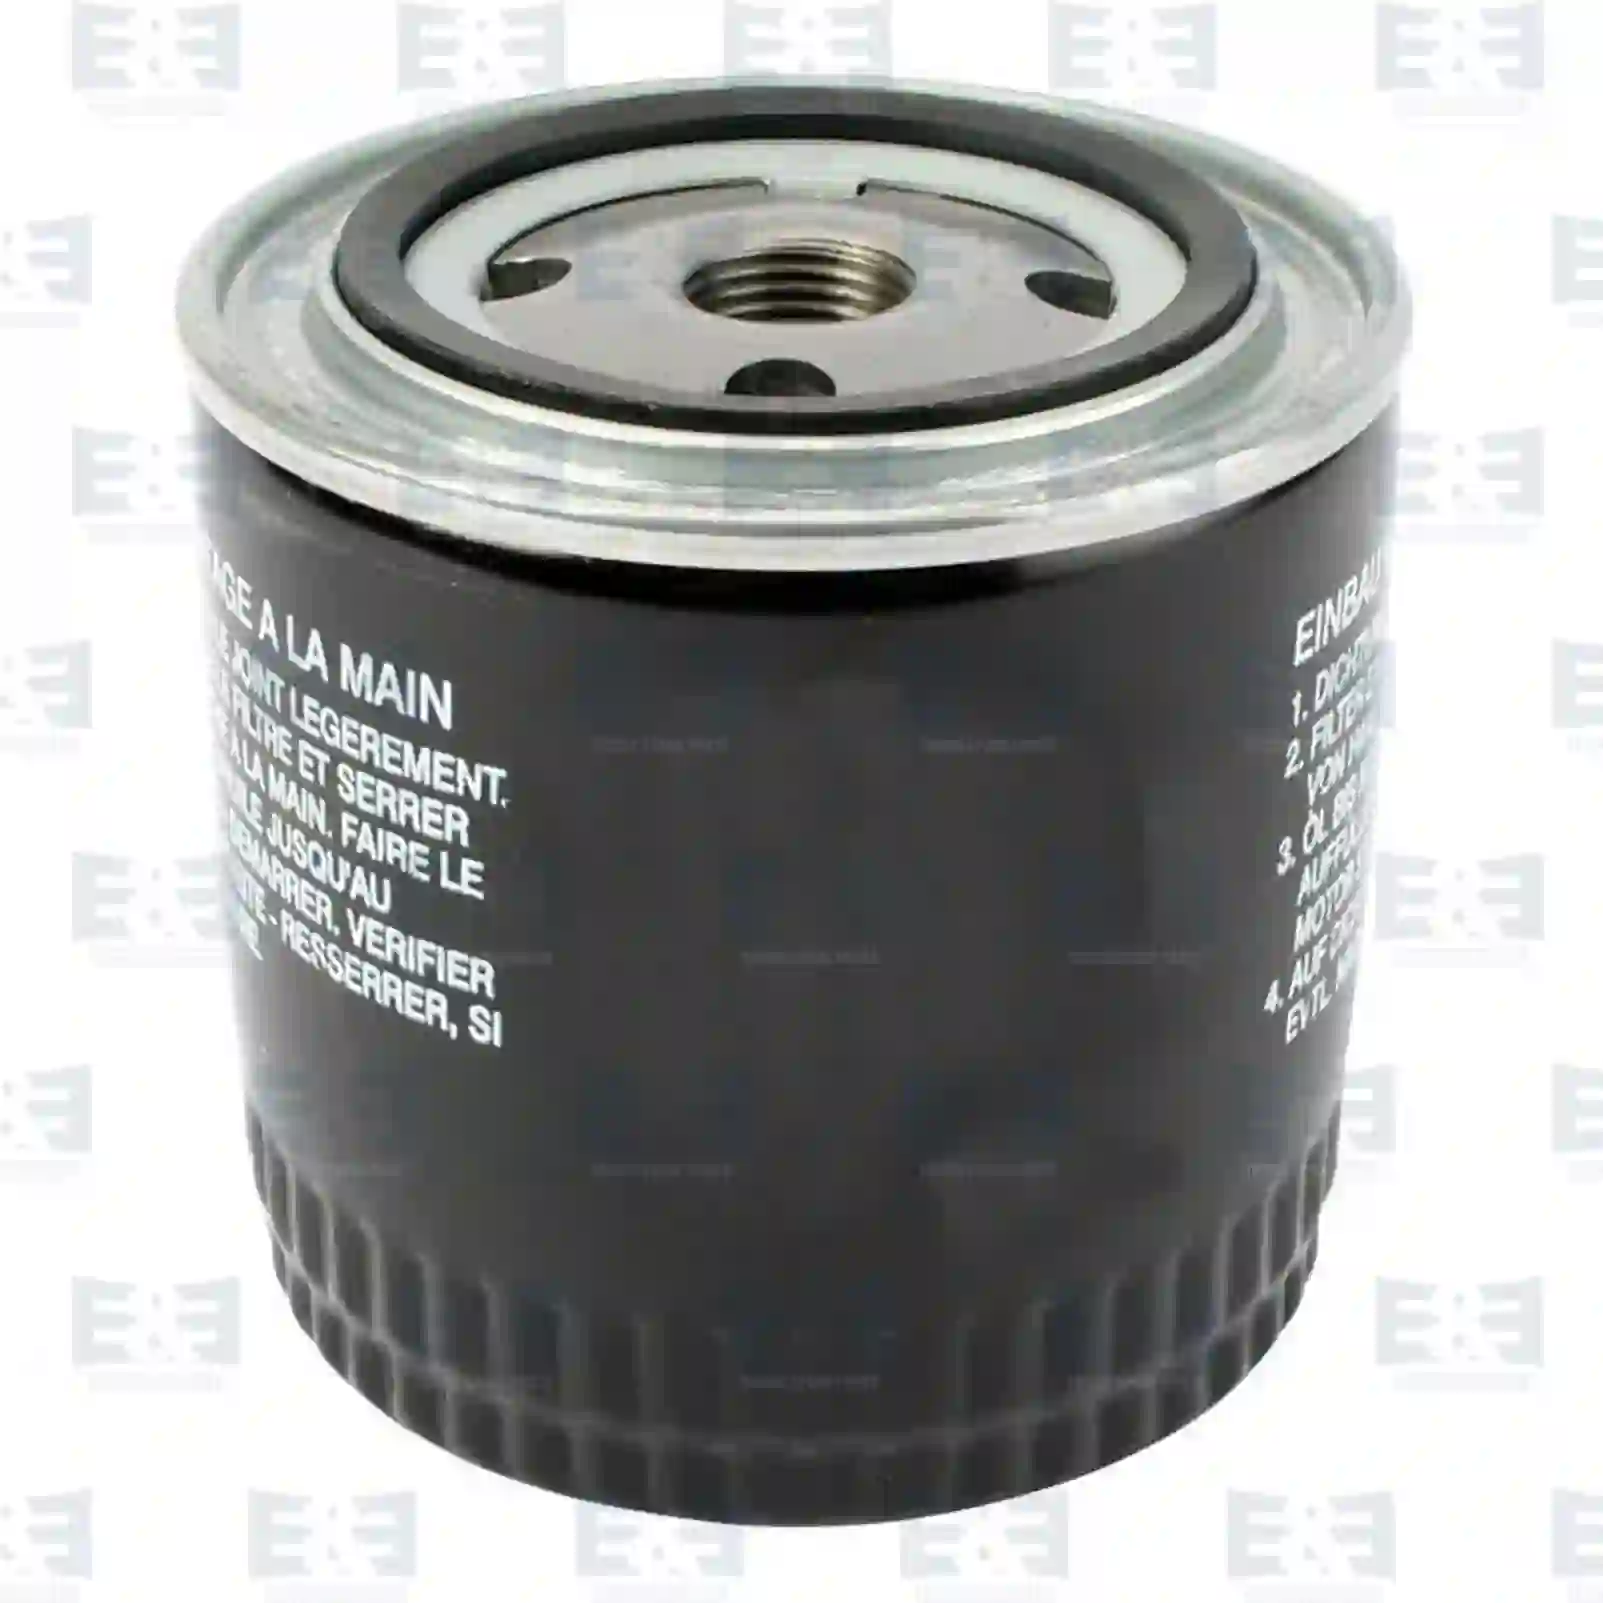 Oil filter, 2E2200887, 7825516, HB03028811, 7007007010006, 7007007021007, 00510313, 00510889, 00534372, 60507080, 224788, 7884256, 7973235, 7973429, W712, 1133277R1, 1133278R1, 3055228, 3055228R91, 3055228R93, 3055763, 3055765, 3056768, 3056768R91, 3132021, 3132021R91, 3132022, 3132022R91, 3132022R92, 3136458, 3136458R91, A46158, D062845, D62845, H334540, K200037, 377-6969, 383-0339, 9Y-4487, 9Y-4506, 2650396, 4041315, 4417559, 5041315, 5057957, 5281090, 75221405, 75221481, X3549957, 110929, 110931, 110945, 110946, 110955, 110978, 1109A0, 0006605760, 7701029278, 148459, 162097, 162997, 12G2400, 12H3274, 13H9090, 13H9104, 1500907, 1500928, ABU8536, RTC3799, 1560025010, 1560025010000, 1560087104, 1560087104000, 1560087307, 1560087307000, 1560125010, 1560187307, 1560187307000, 40111834, 401118834, 03003477, 10654074, 0141151201, 141151110, 141151201, 12153174, 7007007010006, 7007007021007, 5281090, 1620482M1, 2680600565, 11464497, 11542957, F120203310170, 04286051, 04316238, 04335580, 04343591, 04363485, 04434790, 05951685, 05951865, 05951895, 05964796, 05965796, 07075753, 07300943, 71134825, 74434825, 78511654, Y03727812, 1457512, 1482151, 1498014, 1498020, 1498021, 1508831, 1515160, 1536304, 1553370, 1556297, 1559937, 1564767, 1565486, 1641158, 464498, 5000860, 5001248, 5001926, 5002097, 5002230, 5002457, 5002530, 5002677, 5002805, 5003329, 5003331, 5003559, 5003560, 5003561, 5003932, 5003968, 5010665, 5012035, 5012040, 5013143, 5013146, 5013319, 5013957, 5014055, 5016957, 6041176, 6061629, 6063340, DNP552290, 2008219, 1003000800690, 1003000800691, 11422189823, 5577618, 7961367, 7965051, 93156669, 9975120, 9975161, 5577618, 7961367, 7965051, 0009830606, 6031840025, 6031840125, 263A107021, 62M01198110, 019468, 0229651, HH1CO-32430, 3055229R91, 3136458R91, 3136459R91, 00620751, 01903790, 02/630795, 5281090, AM31205, AM35176, AM37025, AM38441, 06501613, 06502613, 03357461, 06501613, 141151201, L24R, L63, 15056-3243-2, 16098-3129-1, 16271-3209-2, 19000-1206, 1C010-3243-0, 1C020-3243-0, HH1C0-3243-0, HH1CO-3243-0, W21ES-O1C0-0, 210101012005, 21011012005, 210110120051, 210501012005, 04434794, 05951865, 05951895, 05964796, 82342881, 82360558, 32821600, 05081070030, 06750258236, 1015511, 1041429, 1043369M91, 1620482M1, 9046817, 13052323802, 1N0114302, 60541180001, 605411880001, 605417880001, 808C01703E1, 15208-80W00, 15208-BN300, 15208-BN30A, 15208-W1106, A5208-W1103, A5208-W1106, 1220185, 122A185, 620751, 770286, 140516130, 110929, 110931, 110945, 110946, 110955, 110978, 1109A0, 0008558238, 0008558910, 0500010031, 0855823800, 5000100351, 5000789225, 5000790022, 5001846635, 6005019727, 6005019740, 6005019759, 6005019763, 7700538153, 7700553733, 7700640165, 7700640175, 7701008698, 7701029278, 7701031111, 7701349151, 7701542286, HDS900, 10803467, 10806225, 12H3274, 801779, ABU8536, 800334, 880334, 24195304, 244191401, 173171, 7496144, 7894066, 914444, 9144445, 930957, 932037, 9320375, 8312000298, 209070087, 2090787, 4060716, 418432, 5041315, 75221405, 75221581, 7910244815, 7910246815, 00120-00001, 00120-00007, 15600-05600, 15600-13050, 15600-20550, 15600-25010, 15600-25070, 15600-87104, 15600-87307, 15600-96001, 15601-20550, 15601-20571, 15601-25010, 15601-78001, 15601-87307, 15601-96001, 15601-96006, 90915-40001, 220530, 3316074, 3338201, 7007007010000, 6231459, 7413694, 7897321, 79078234, 79270542, 8614752, 021115351A, ZG01696-0008 ||  2E2200887 E&E Truck Spare Parts | Truck Spare Parts, Auotomotive Spare Parts Oil filter, 2E2200887, 7825516, HB03028811, 7007007010006, 7007007021007, 00510313, 00510889, 00534372, 60507080, 224788, 7884256, 7973235, 7973429, W712, 1133277R1, 1133278R1, 3055228, 3055228R91, 3055228R93, 3055763, 3055765, 3056768, 3056768R91, 3132021, 3132021R91, 3132022, 3132022R91, 3132022R92, 3136458, 3136458R91, A46158, D062845, D62845, H334540, K200037, 377-6969, 383-0339, 9Y-4487, 9Y-4506, 2650396, 4041315, 4417559, 5041315, 5057957, 5281090, 75221405, 75221481, X3549957, 110929, 110931, 110945, 110946, 110955, 110978, 1109A0, 0006605760, 7701029278, 148459, 162097, 162997, 12G2400, 12H3274, 13H9090, 13H9104, 1500907, 1500928, ABU8536, RTC3799, 1560025010, 1560025010000, 1560087104, 1560087104000, 1560087307, 1560087307000, 1560125010, 1560187307, 1560187307000, 40111834, 401118834, 03003477, 10654074, 0141151201, 141151110, 141151201, 12153174, 7007007010006, 7007007021007, 5281090, 1620482M1, 2680600565, 11464497, 11542957, F120203310170, 04286051, 04316238, 04335580, 04343591, 04363485, 04434790, 05951685, 05951865, 05951895, 05964796, 05965796, 07075753, 07300943, 71134825, 74434825, 78511654, Y03727812, 1457512, 1482151, 1498014, 1498020, 1498021, 1508831, 1515160, 1536304, 1553370, 1556297, 1559937, 1564767, 1565486, 1641158, 464498, 5000860, 5001248, 5001926, 5002097, 5002230, 5002457, 5002530, 5002677, 5002805, 5003329, 5003331, 5003559, 5003560, 5003561, 5003932, 5003968, 5010665, 5012035, 5012040, 5013143, 5013146, 5013319, 5013957, 5014055, 5016957, 6041176, 6061629, 6063340, DNP552290, 2008219, 1003000800690, 1003000800691, 11422189823, 5577618, 7961367, 7965051, 93156669, 9975120, 9975161, 5577618, 7961367, 7965051, 0009830606, 6031840025, 6031840125, 263A107021, 62M01198110, 019468, 0229651, HH1CO-32430, 3055229R91, 3136458R91, 3136459R91, 00620751, 01903790, 02/630795, 5281090, AM31205, AM35176, AM37025, AM38441, 06501613, 06502613, 03357461, 06501613, 141151201, L24R, L63, 15056-3243-2, 16098-3129-1, 16271-3209-2, 19000-1206, 1C010-3243-0, 1C020-3243-0, HH1C0-3243-0, HH1CO-3243-0, W21ES-O1C0-0, 210101012005, 21011012005, 210110120051, 210501012005, 04434794, 05951865, 05951895, 05964796, 82342881, 82360558, 32821600, 05081070030, 06750258236, 1015511, 1041429, 1043369M91, 1620482M1, 9046817, 13052323802, 1N0114302, 60541180001, 605411880001, 605417880001, 808C01703E1, 15208-80W00, 15208-BN300, 15208-BN30A, 15208-W1106, A5208-W1103, A5208-W1106, 1220185, 122A185, 620751, 770286, 140516130, 110929, 110931, 110945, 110946, 110955, 110978, 1109A0, 0008558238, 0008558910, 0500010031, 0855823800, 5000100351, 5000789225, 5000790022, 5001846635, 6005019727, 6005019740, 6005019759, 6005019763, 7700538153, 7700553733, 7700640165, 7700640175, 7701008698, 7701029278, 7701031111, 7701349151, 7701542286, HDS900, 10803467, 10806225, 12H3274, 801779, ABU8536, 800334, 880334, 24195304, 244191401, 173171, 7496144, 7894066, 914444, 9144445, 930957, 932037, 9320375, 8312000298, 209070087, 2090787, 4060716, 418432, 5041315, 75221405, 75221581, 7910244815, 7910246815, 00120-00001, 00120-00007, 15600-05600, 15600-13050, 15600-20550, 15600-25010, 15600-25070, 15600-87104, 15600-87307, 15600-96001, 15601-20550, 15601-20571, 15601-25010, 15601-78001, 15601-87307, 15601-96001, 15601-96006, 90915-40001, 220530, 3316074, 3338201, 7007007010000, 6231459, 7413694, 7897321, 79078234, 79270542, 8614752, 021115351A, ZG01696-0008 ||  2E2200887 E&E Truck Spare Parts | Truck Spare Parts, Auotomotive Spare Parts